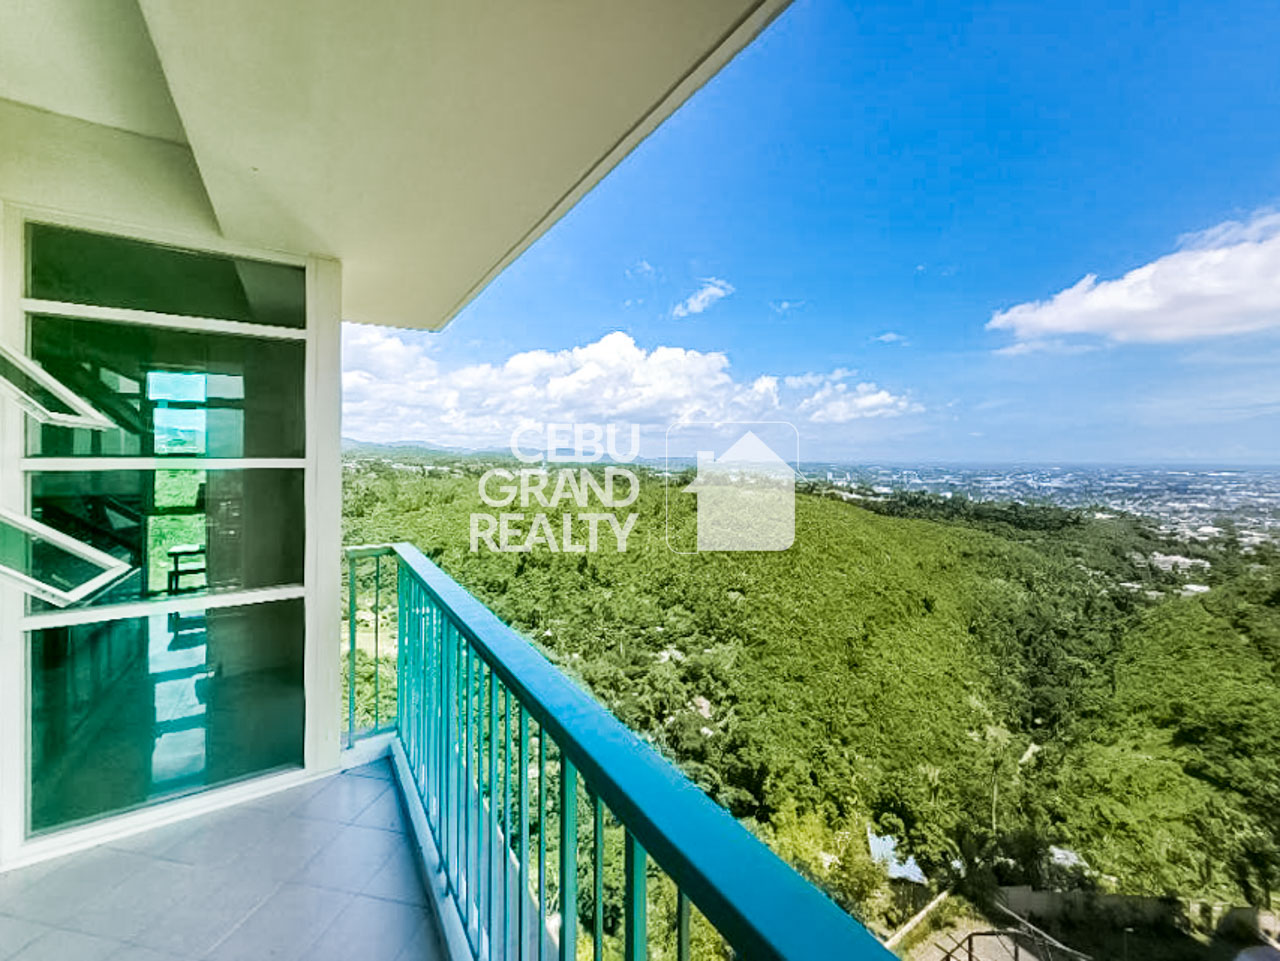 SRBCL9 Semi-Furnished 2 Bedroom Condo for Sale in Citylights Gardens - 15